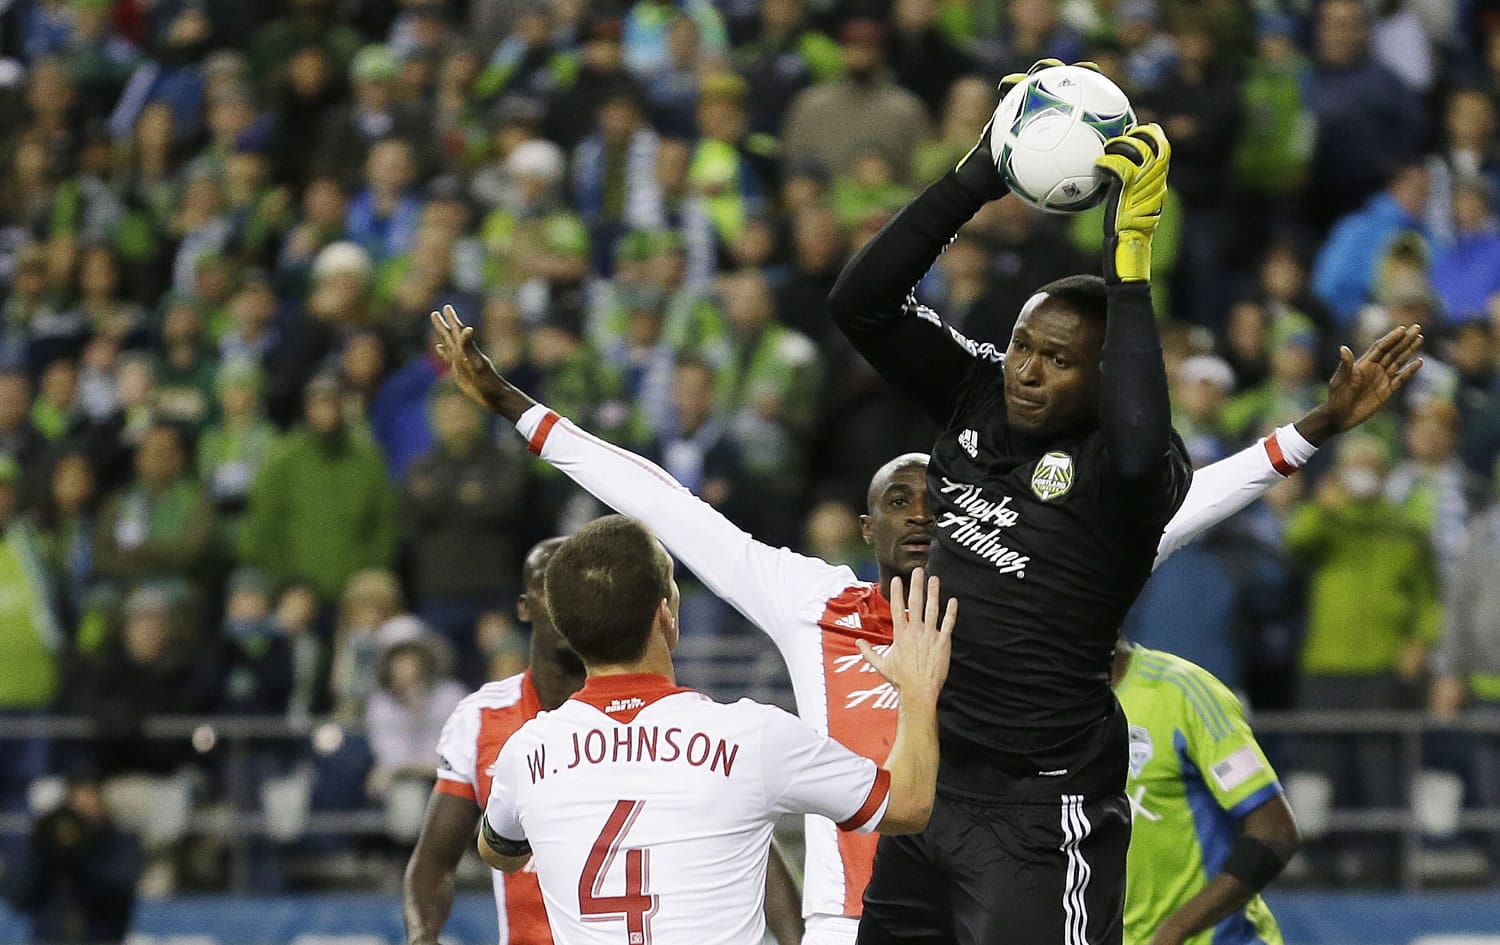 Portland Timbers goalkeeper Donovan Ricketts, right, pulls down the ball in the second half of the first game of the Western Conference semifinals in the MLS Cup soccer playoffs on Saturday, Nov. 2, 2013, in Seattle. The Timbers defeated the Sounders 2-1 in the first of two aggregate-score matches. (AP Photo/Ted S.